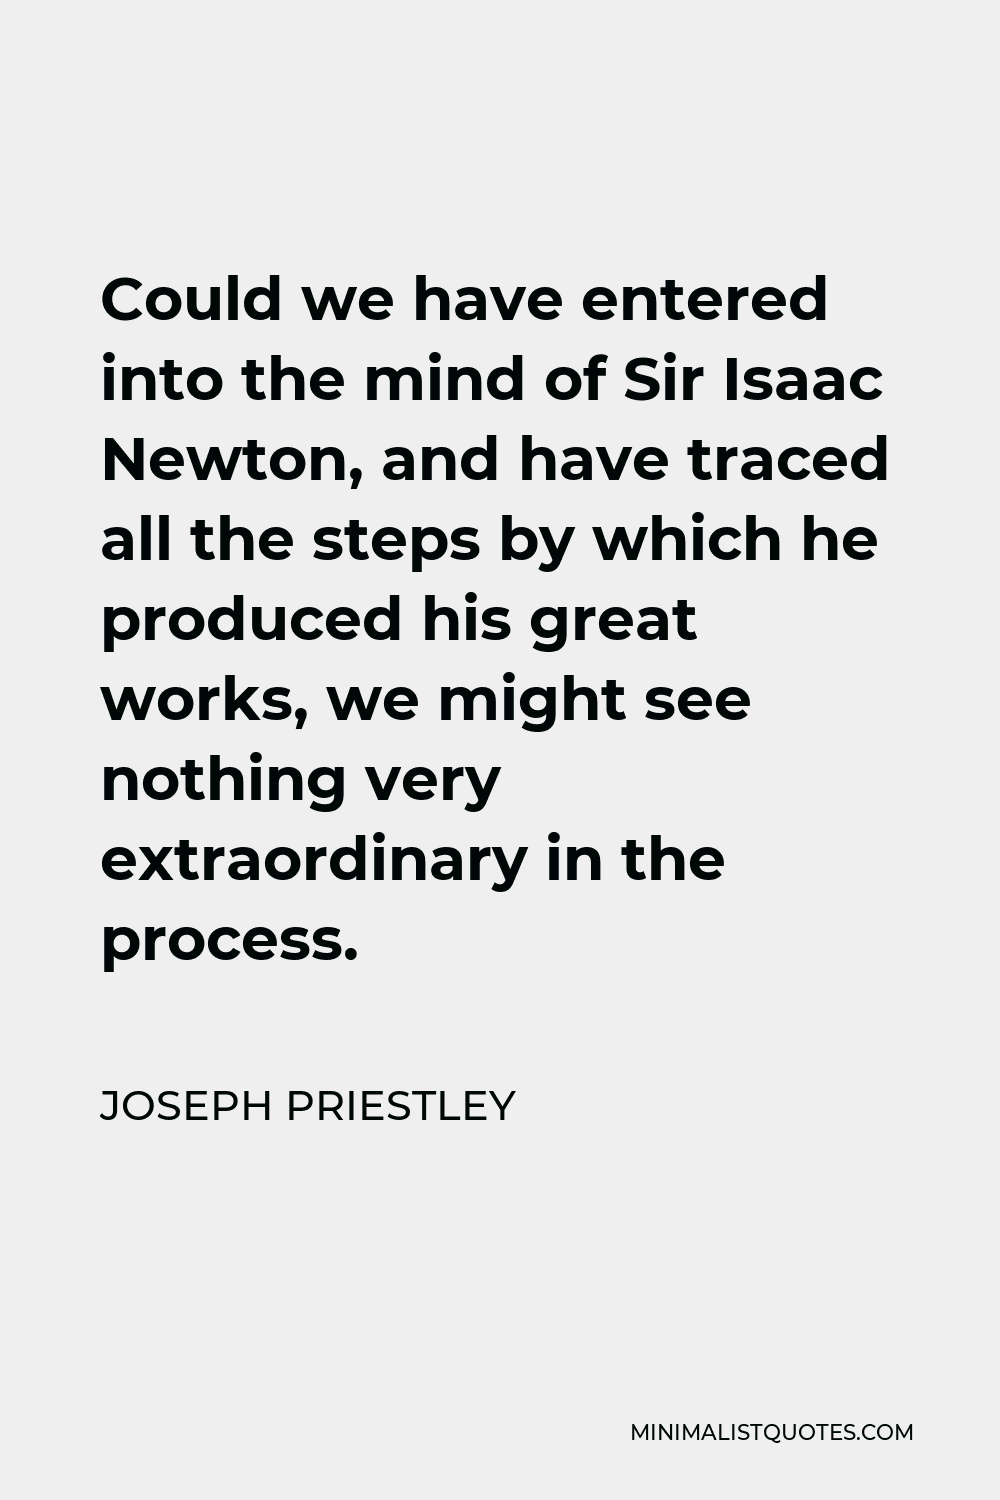 Joseph Priestley Quote - Could we have entered into the mind of Sir Isaac Newton, and have traced all the steps by which he produced his great works, we might see nothing very extraordinary in the process.